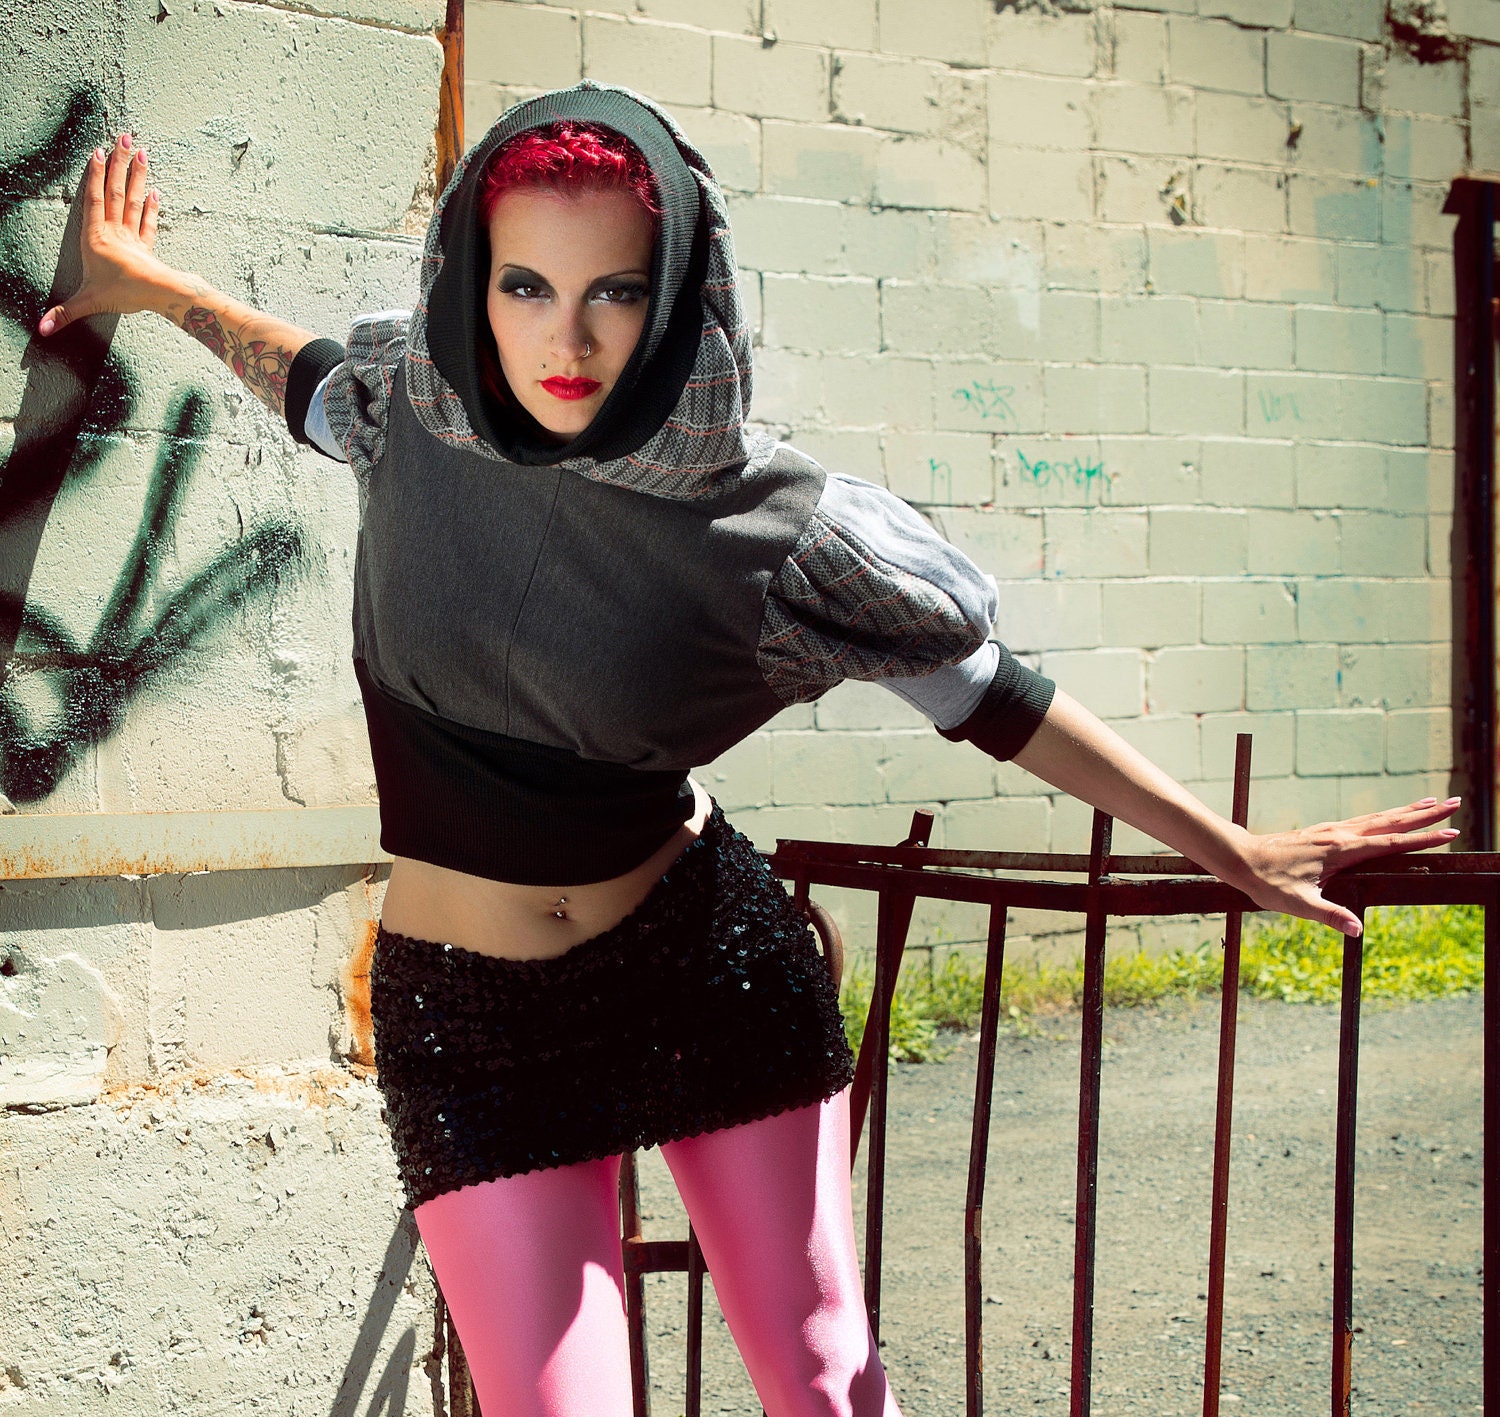 Cyber Goth Fashion Over-sized Hoodie Lost in Area 51 by Janice Louise Miller - glaciermilk